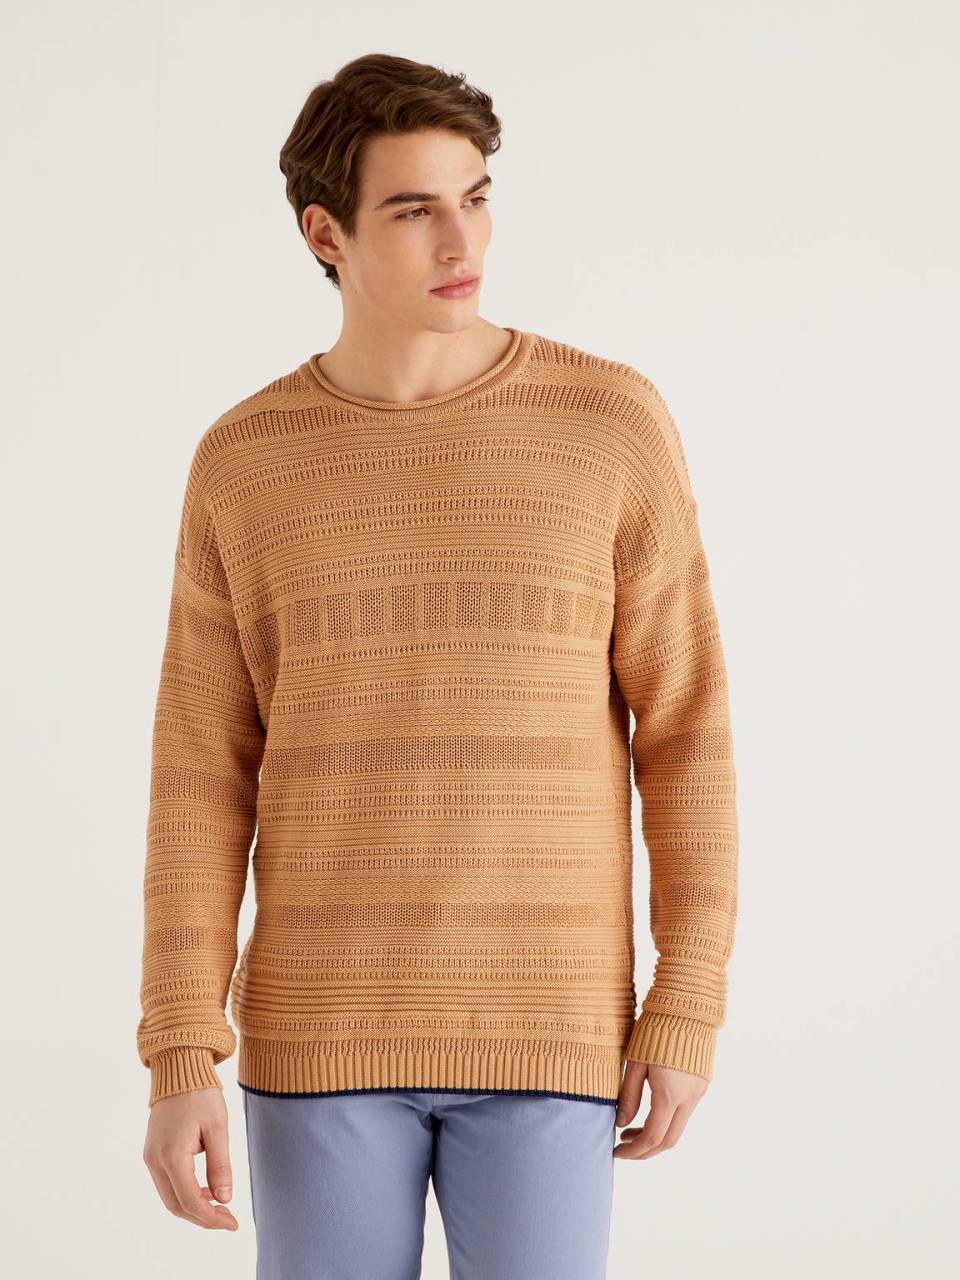 Benetton Knit sweater in 100% cotton. 1